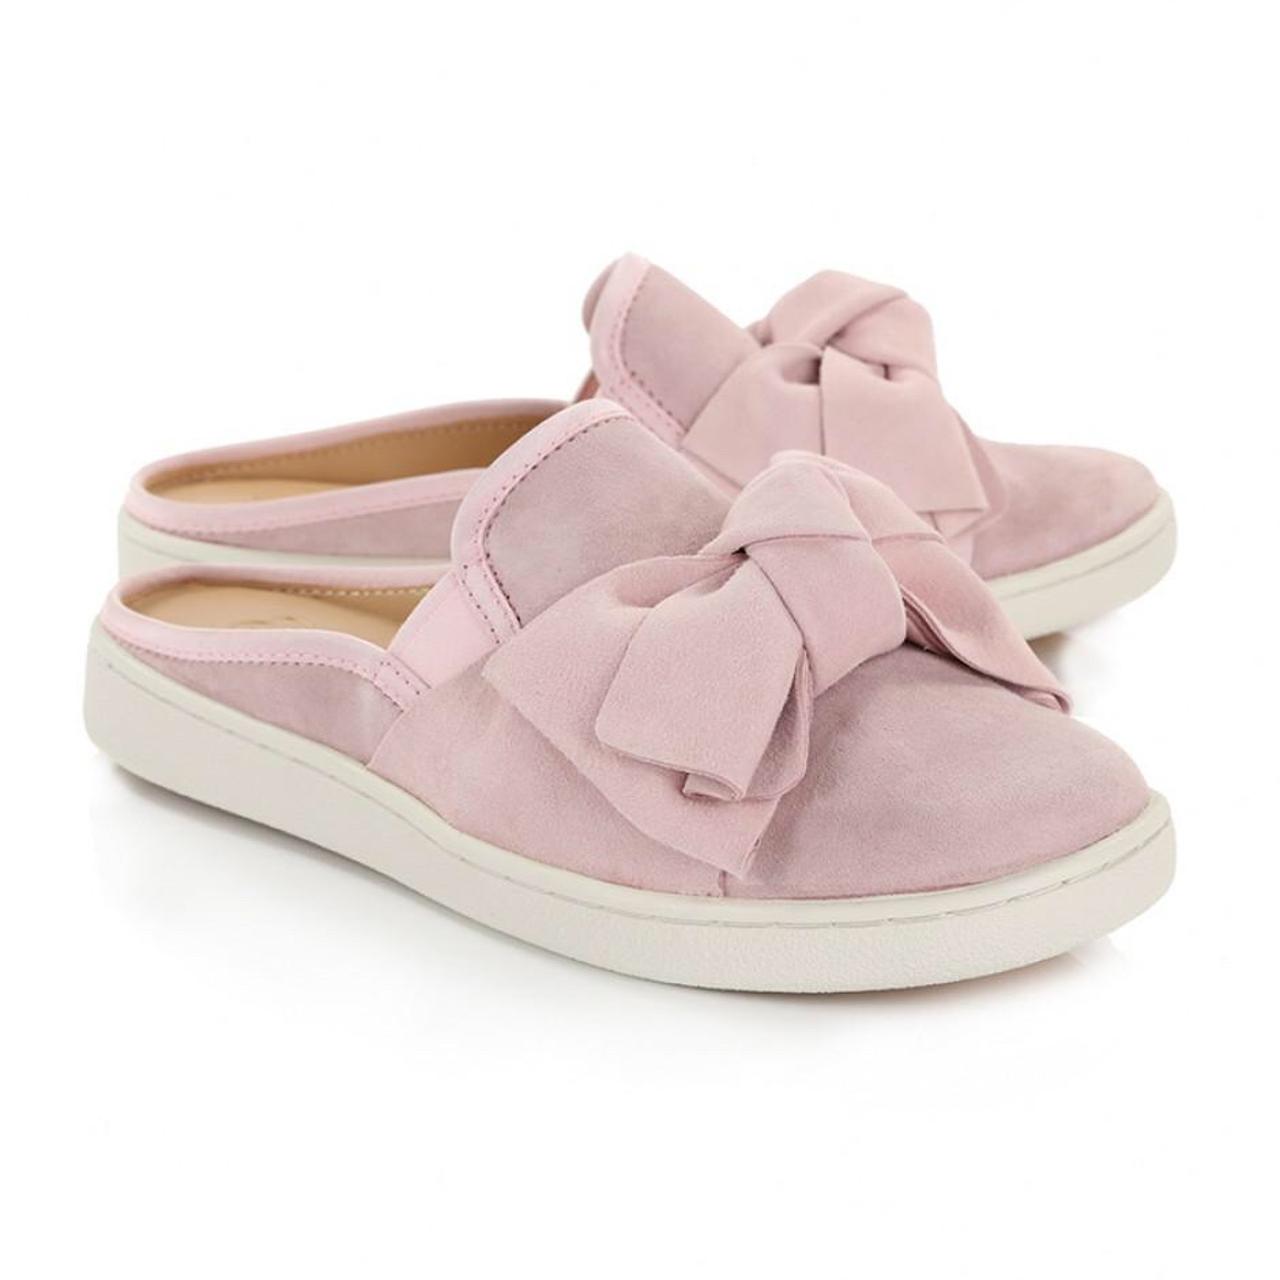 Super cute pink slip-on shoes by... - Depop